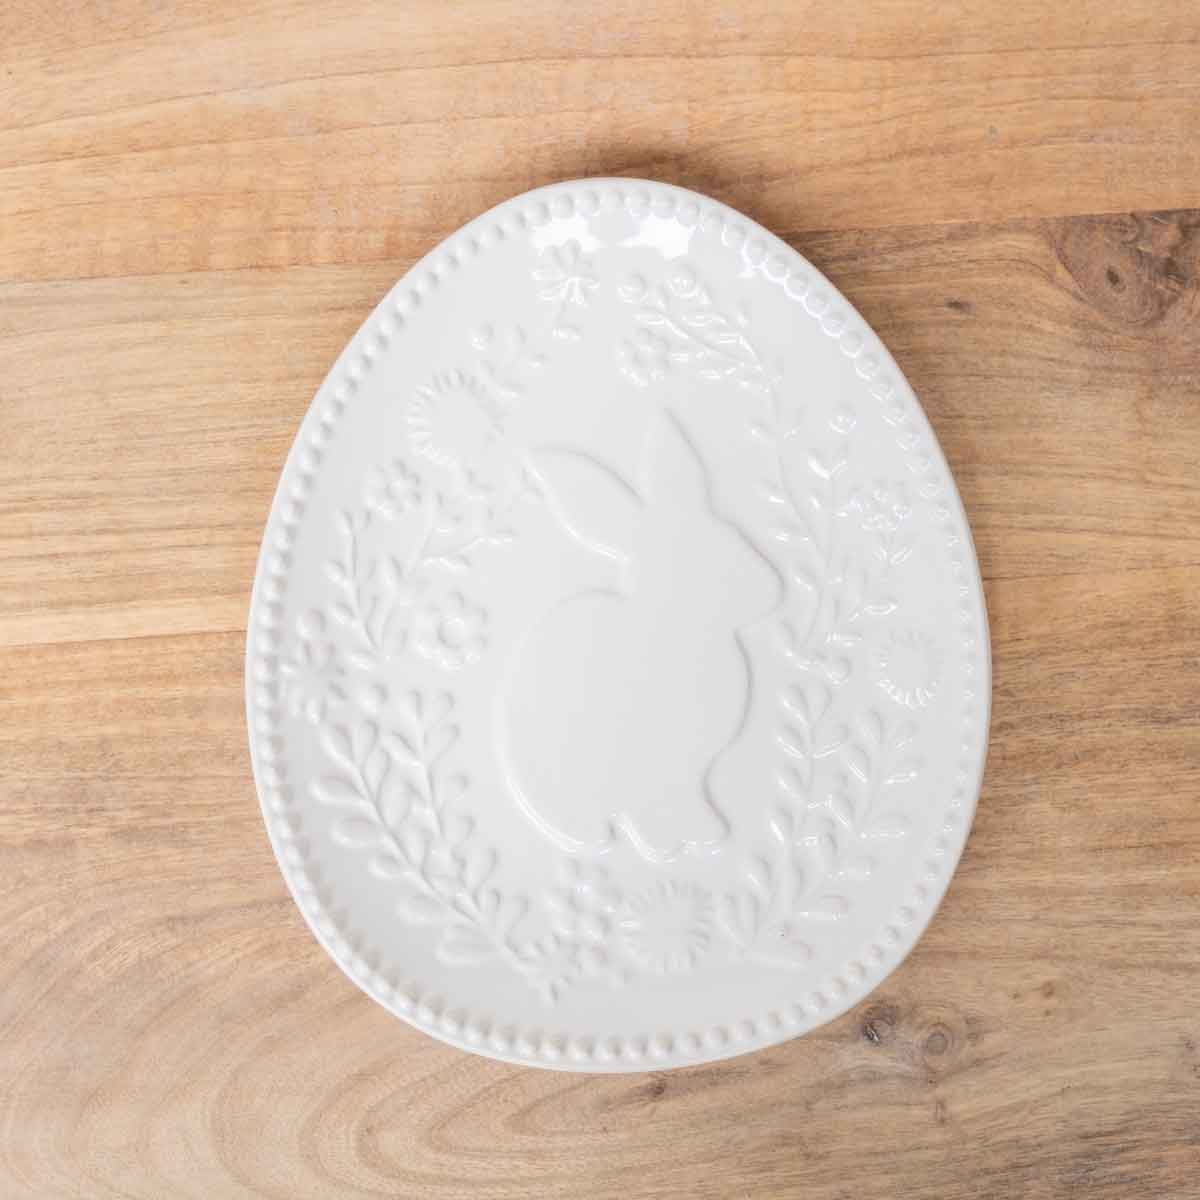 Embossed Floral Bunny Plate in Antique White